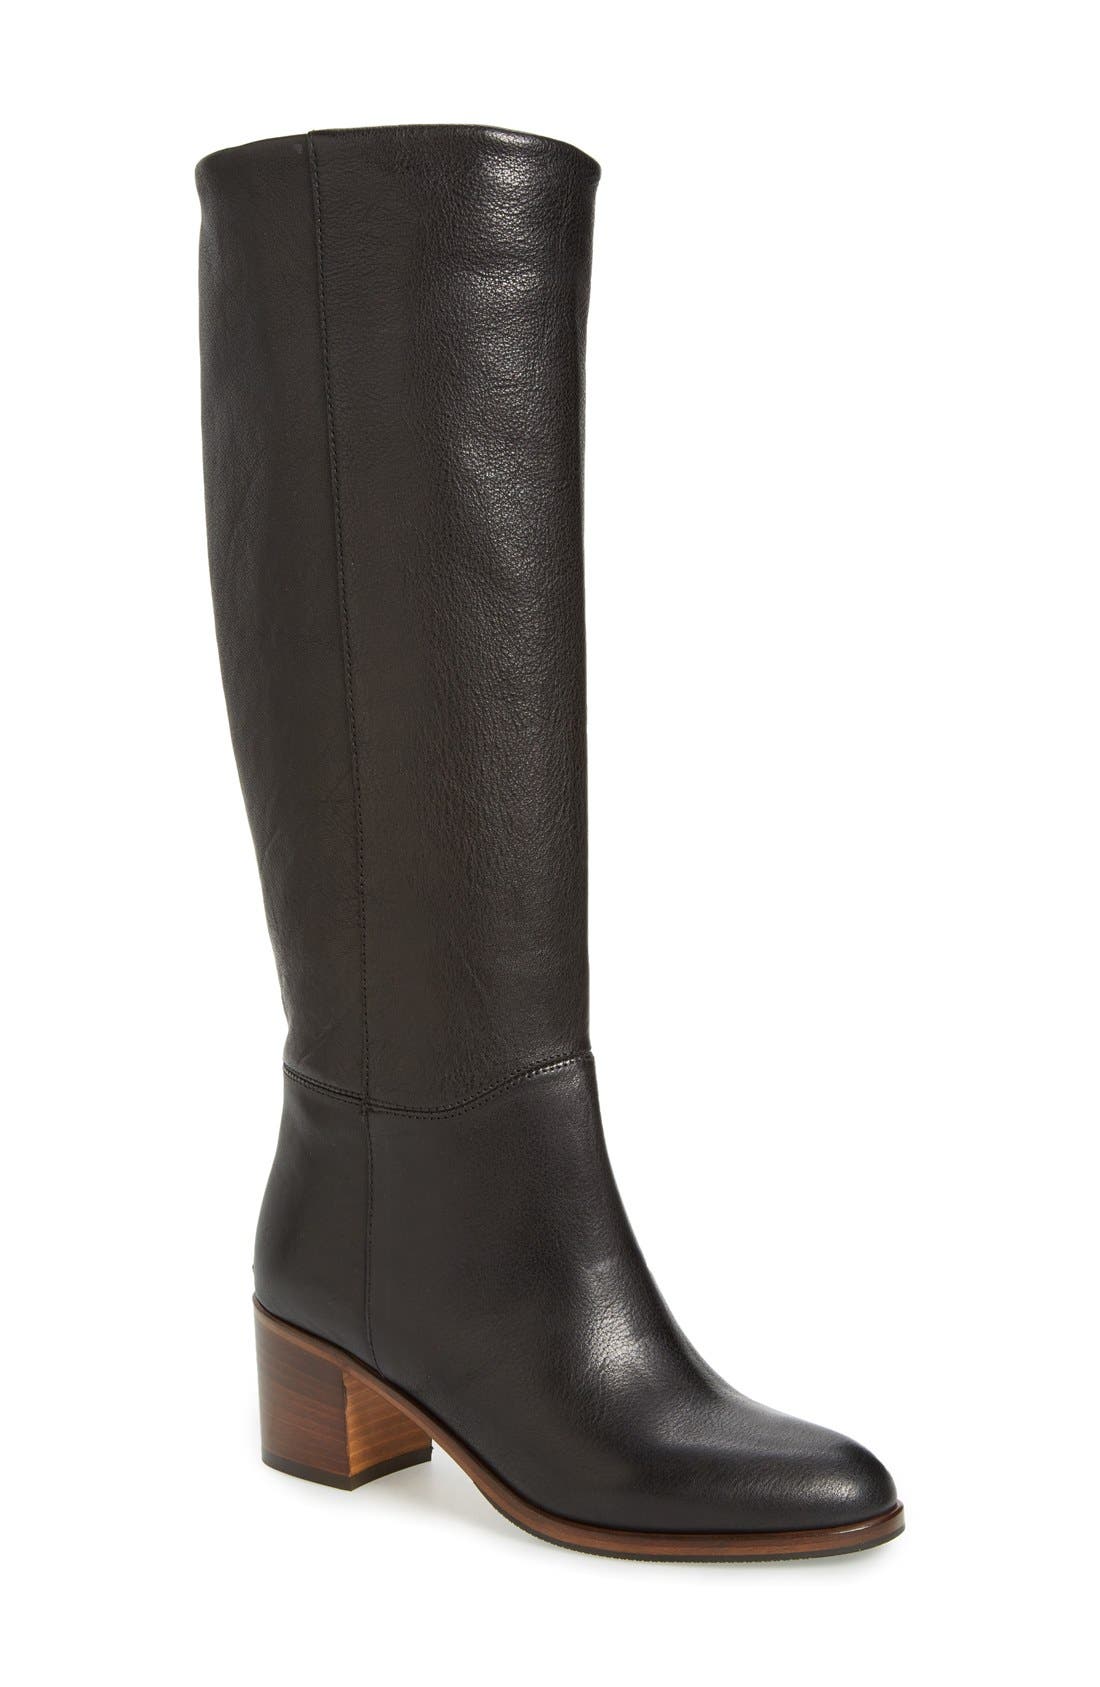 kate spade boots nordstrom